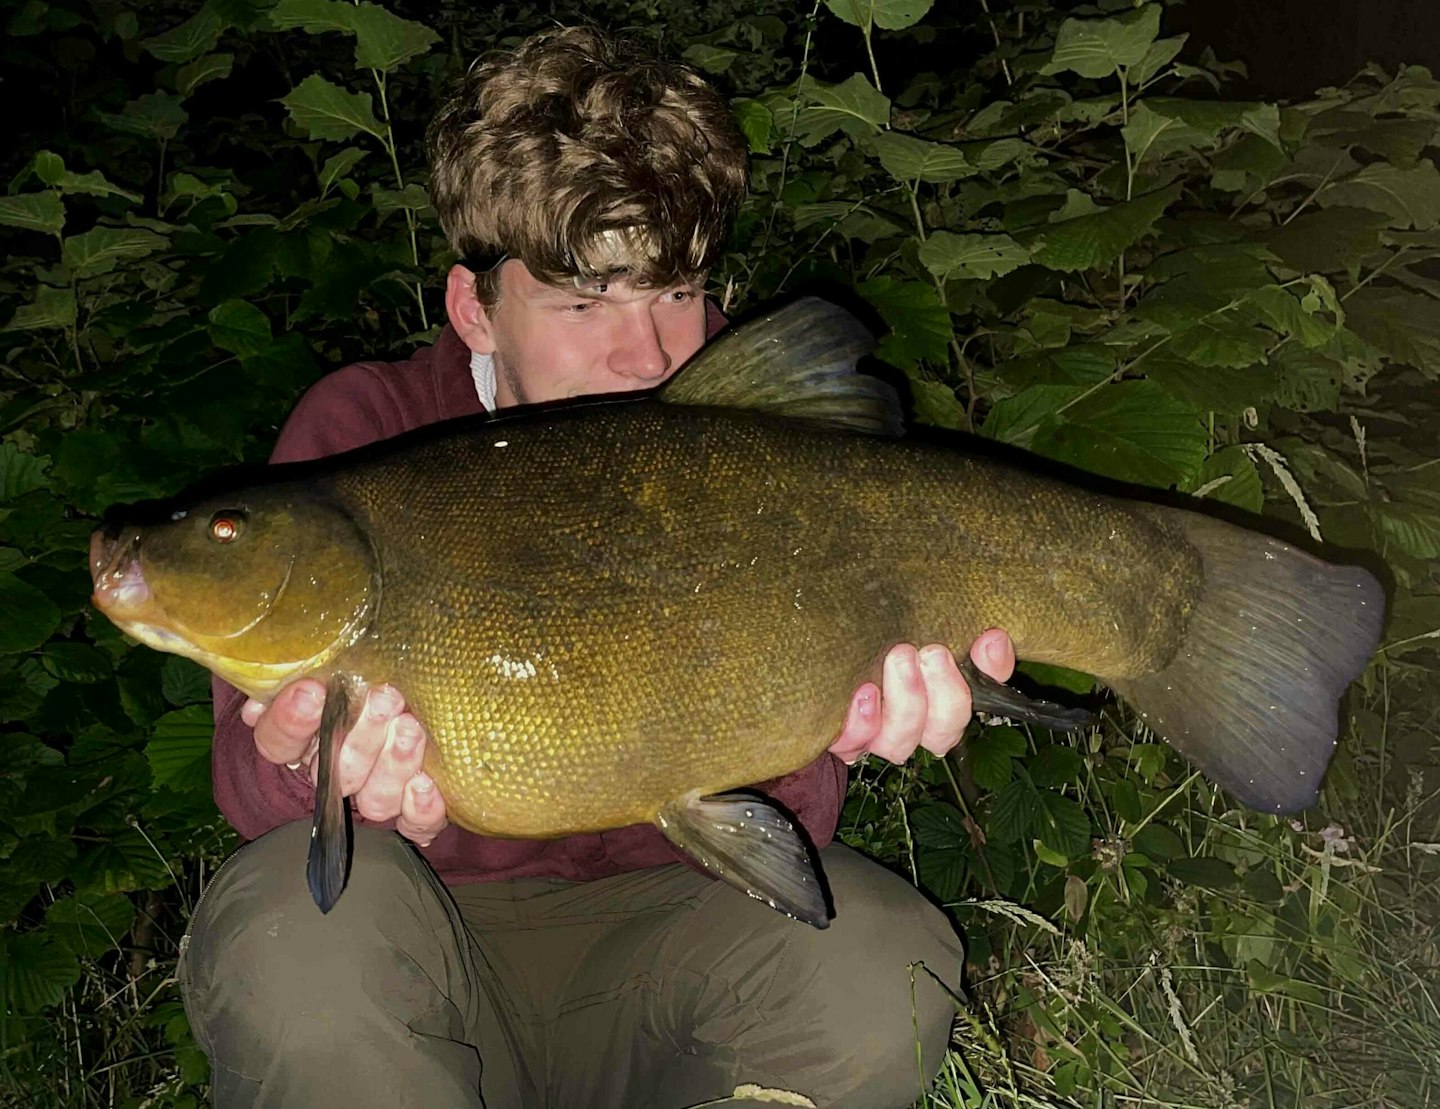 I was amazed by the size of this tench” – Alex Noke